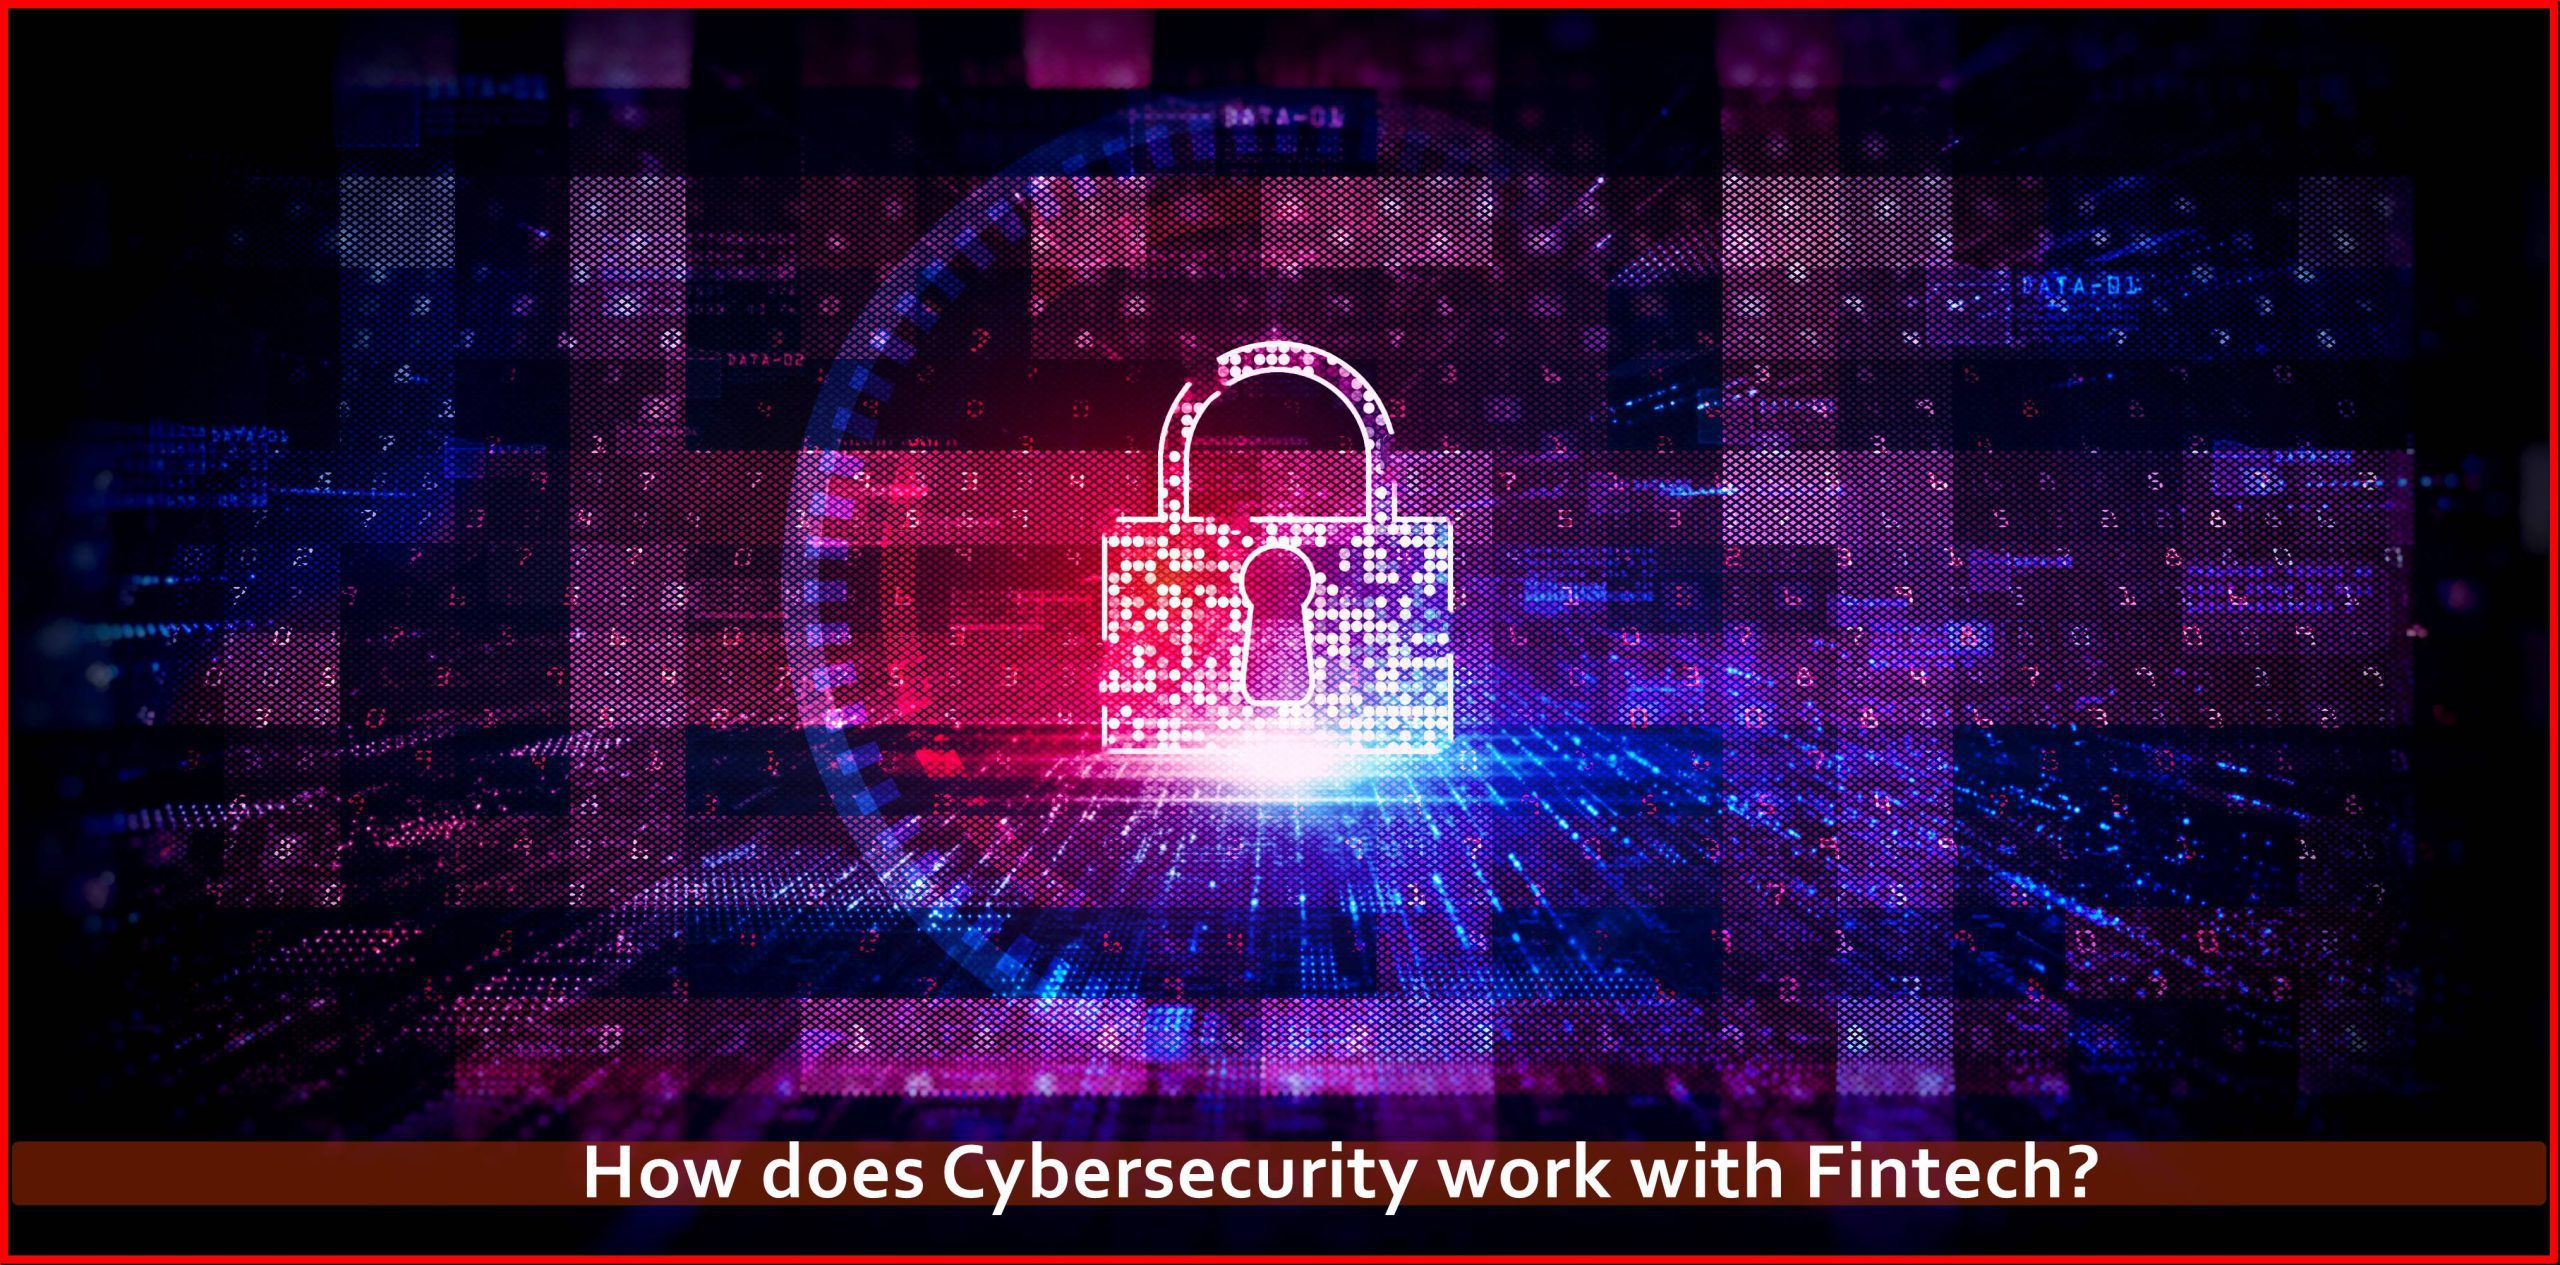 How does Cybersecurity work with Fintech?